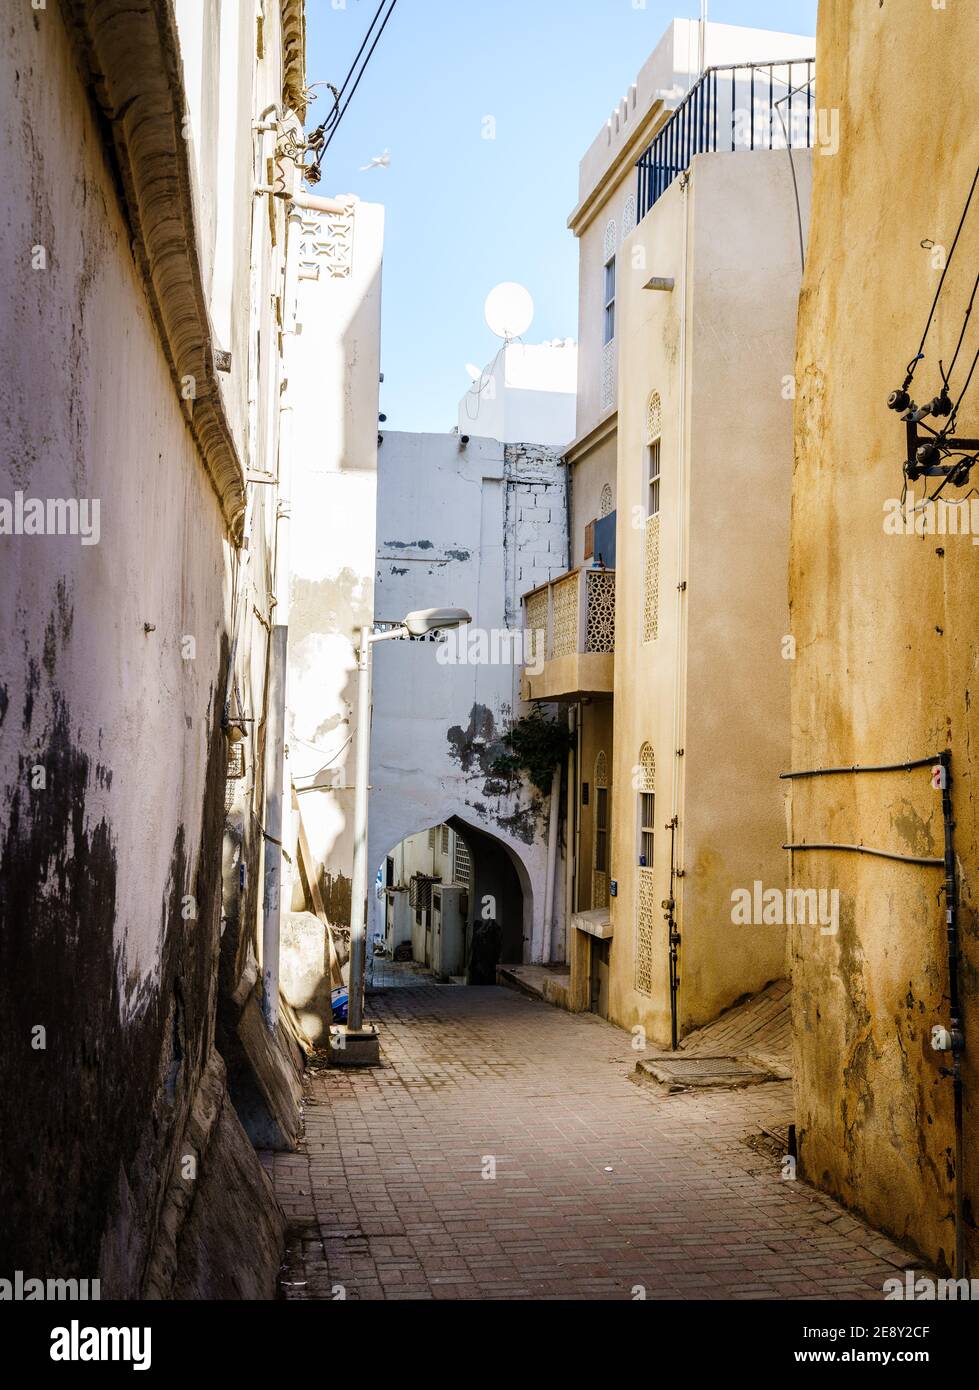 A small residential street in Muscat, Oman Stock Photo